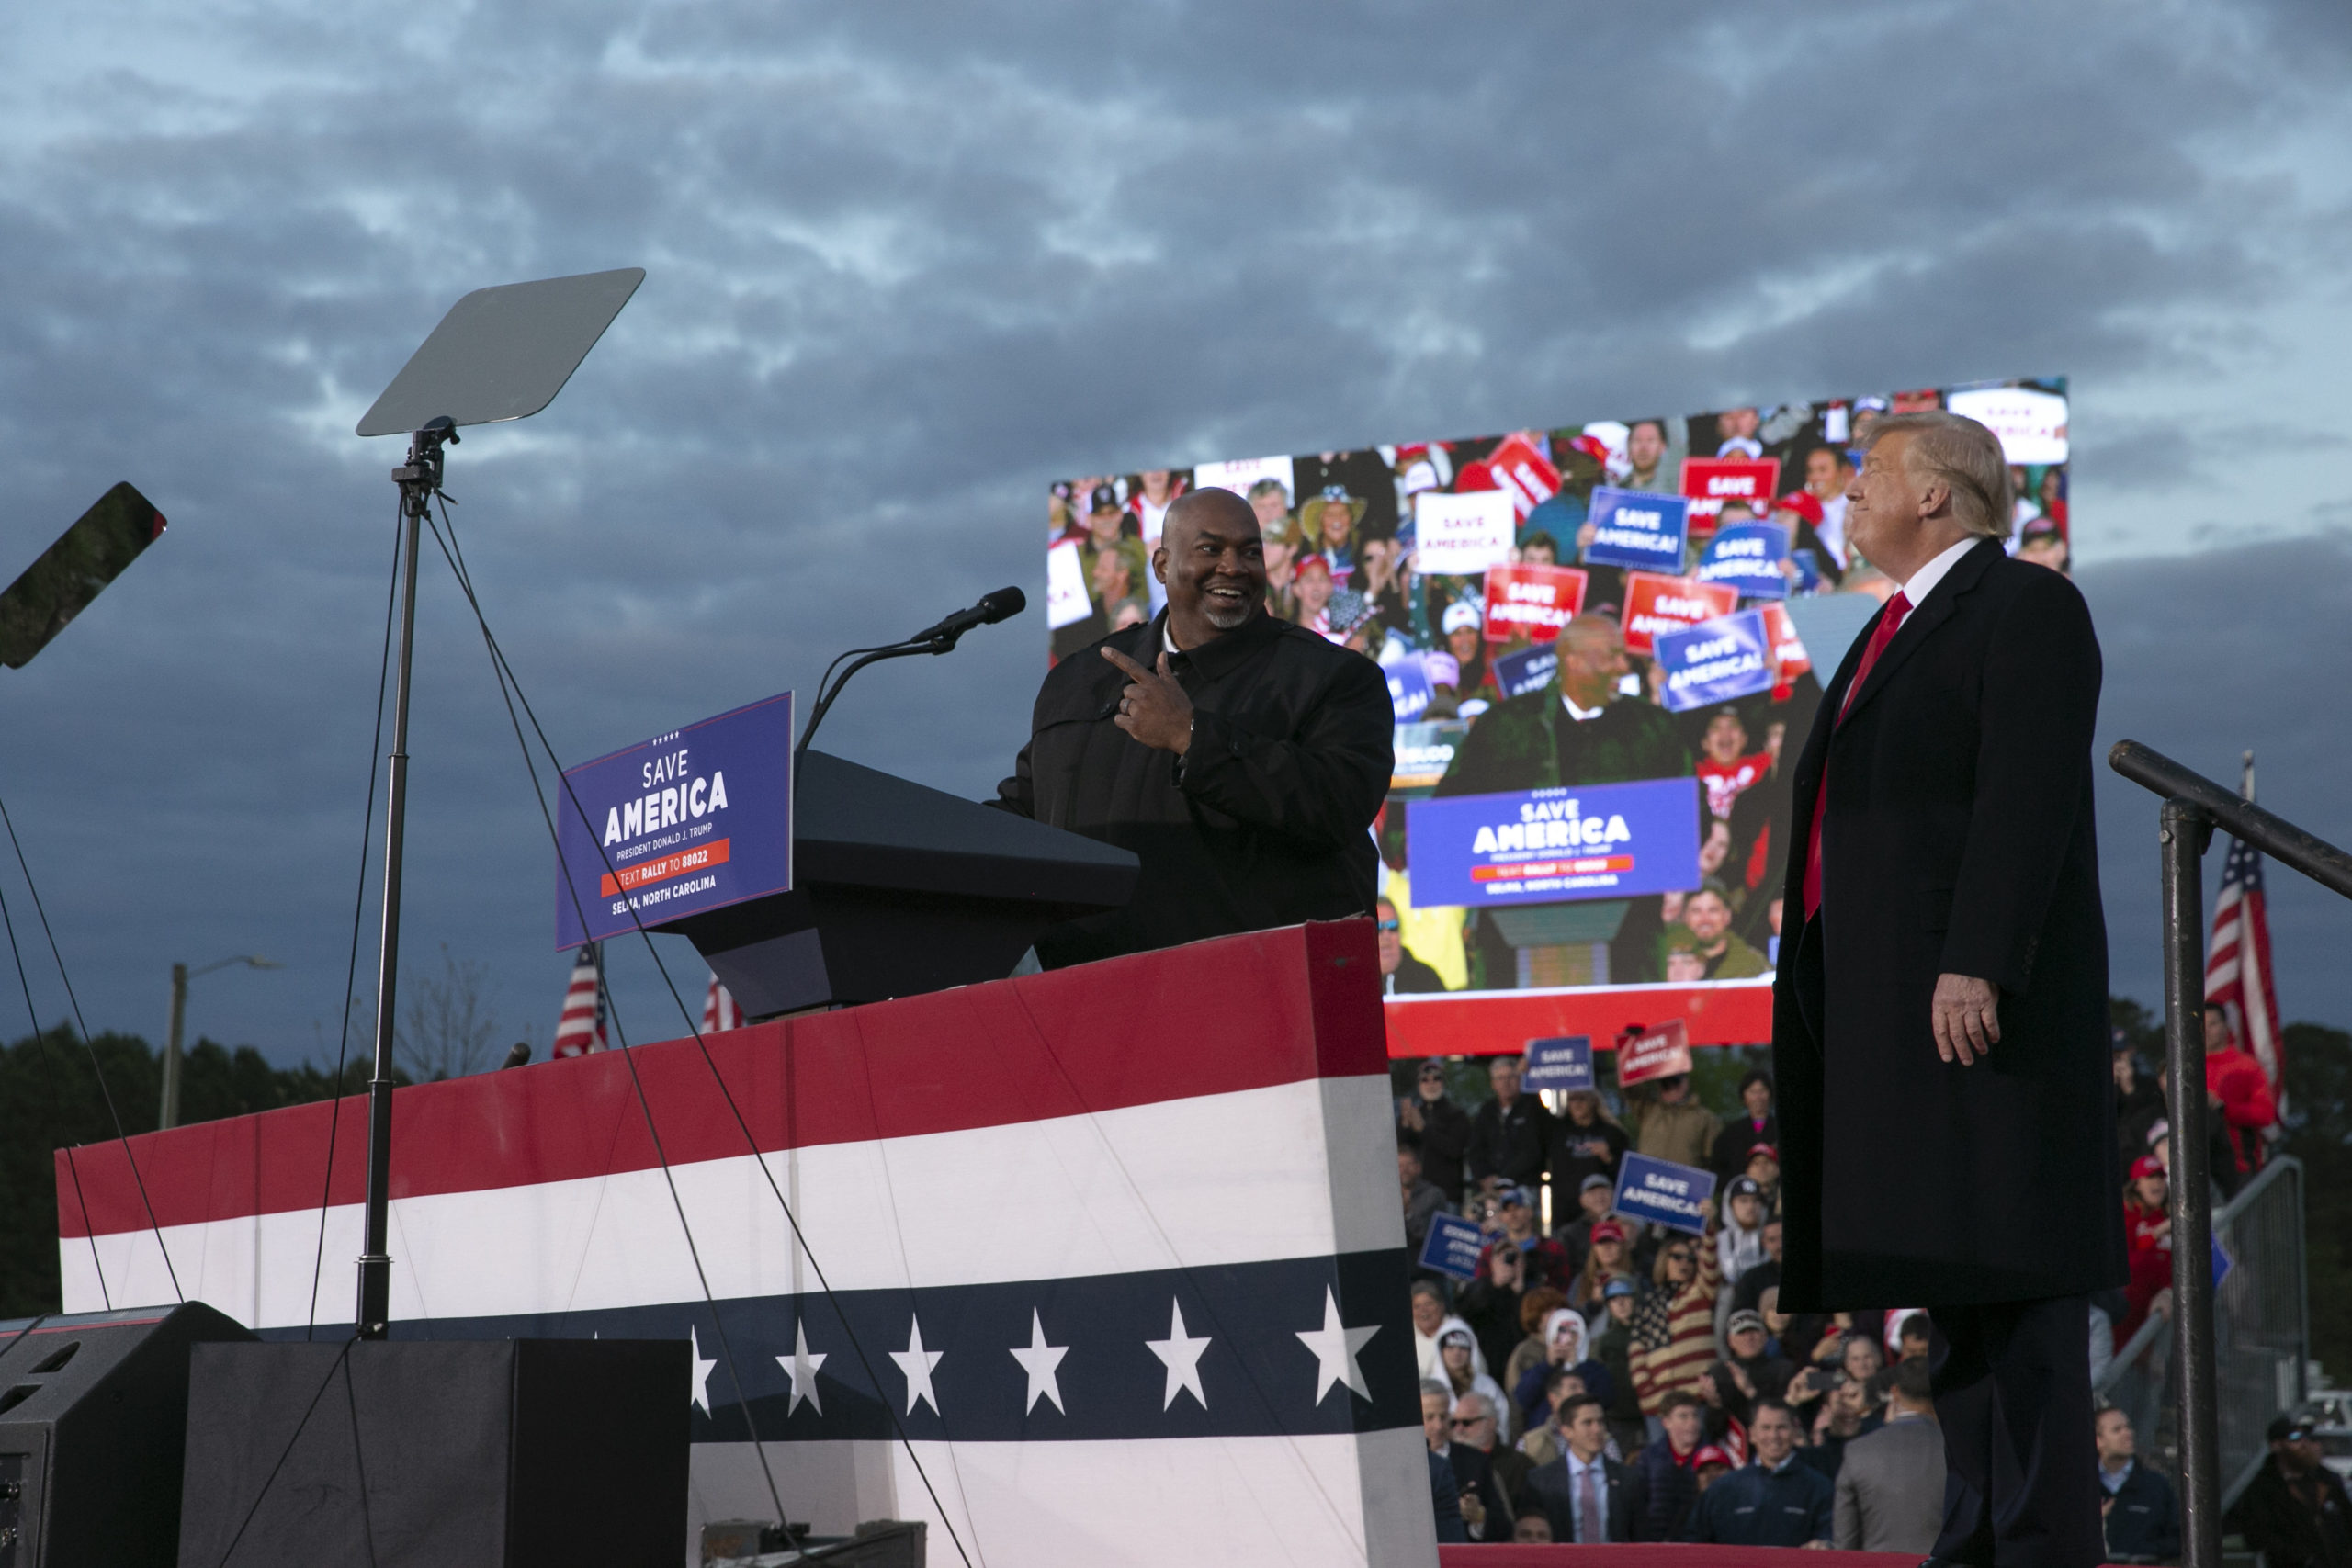 SELMA, NC - APRIL 09: Lt. Gov. Mark Robinson joins the stage with former U.S. President Donald Trump during a rally at The Farm at 95 on April 9, 2022 in Selma, North Carolina. The rally comes about five weeks before North Carolinas primary elections where Trump has thrown his support behind candidates in some key Republican races. (Photo by Allison Joyce/Getty Images)